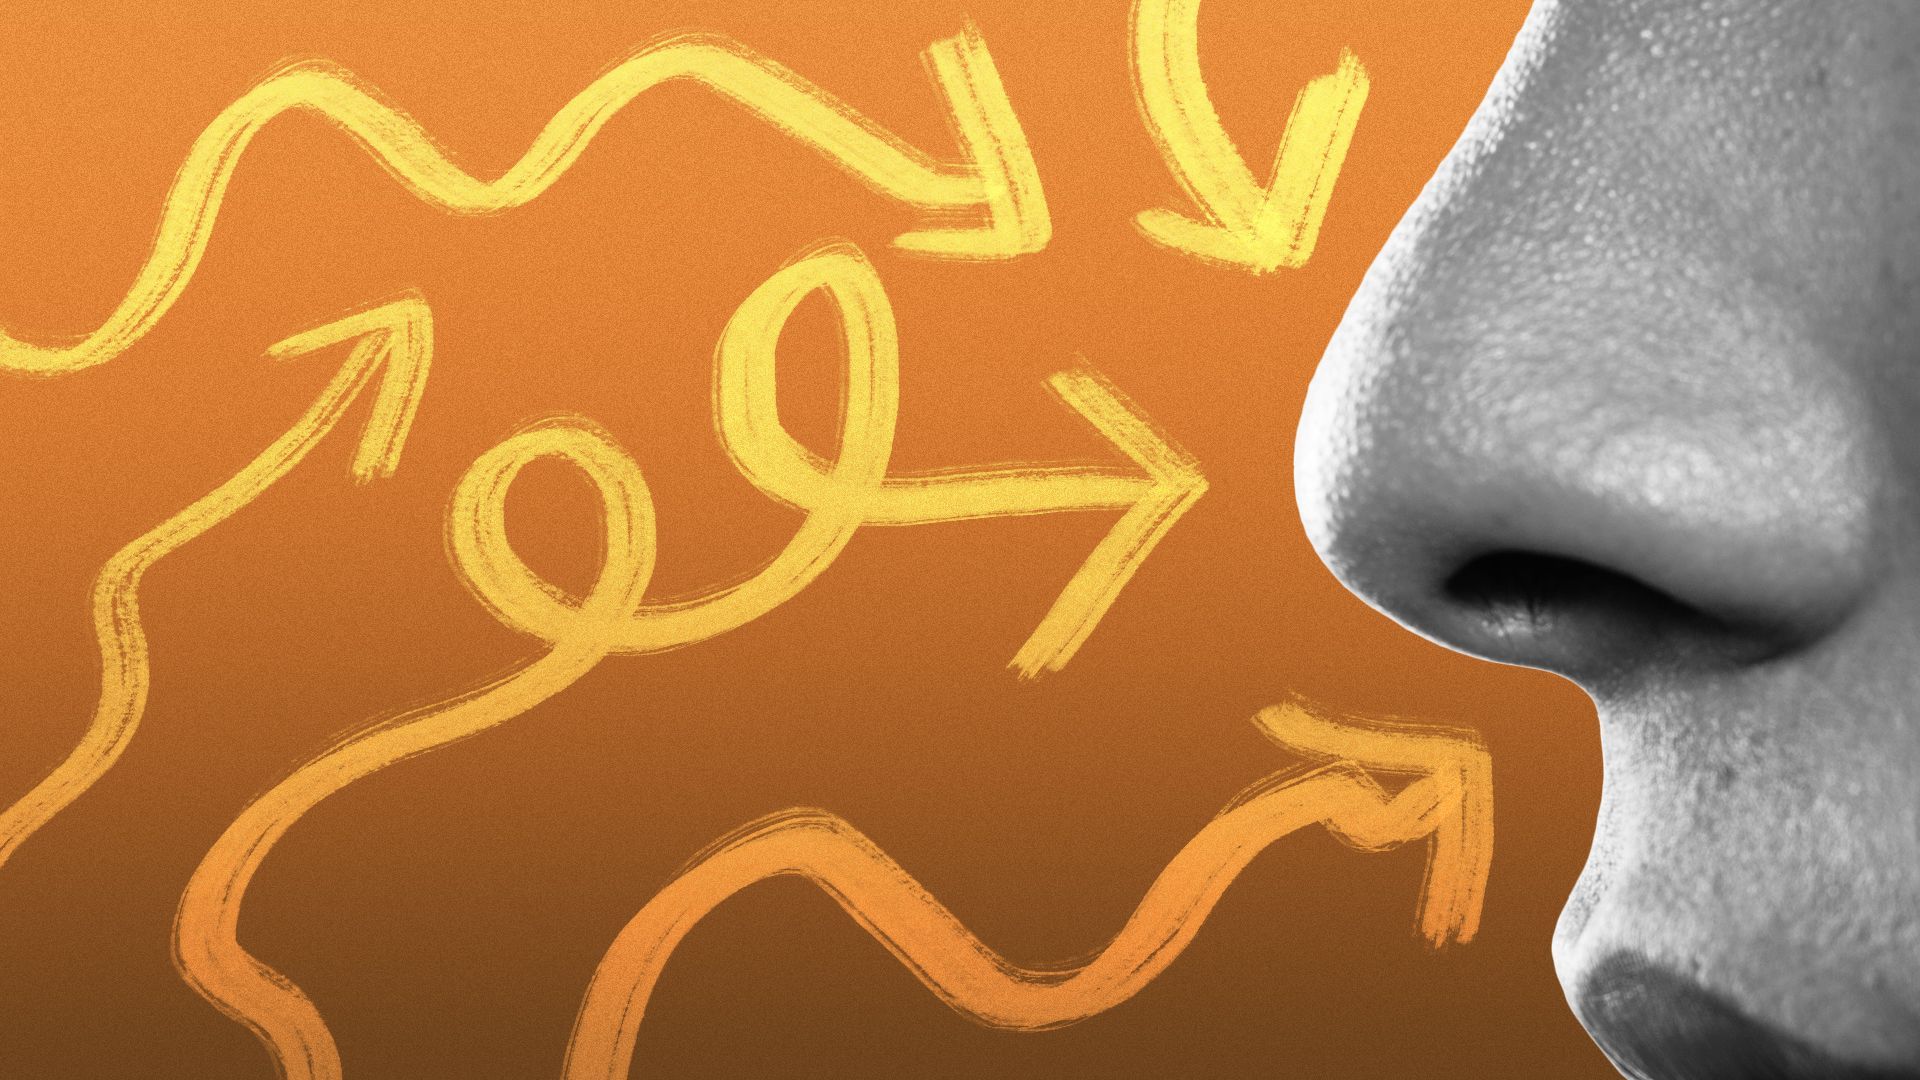 Illustration of squiggly arrows pointing at a nose.